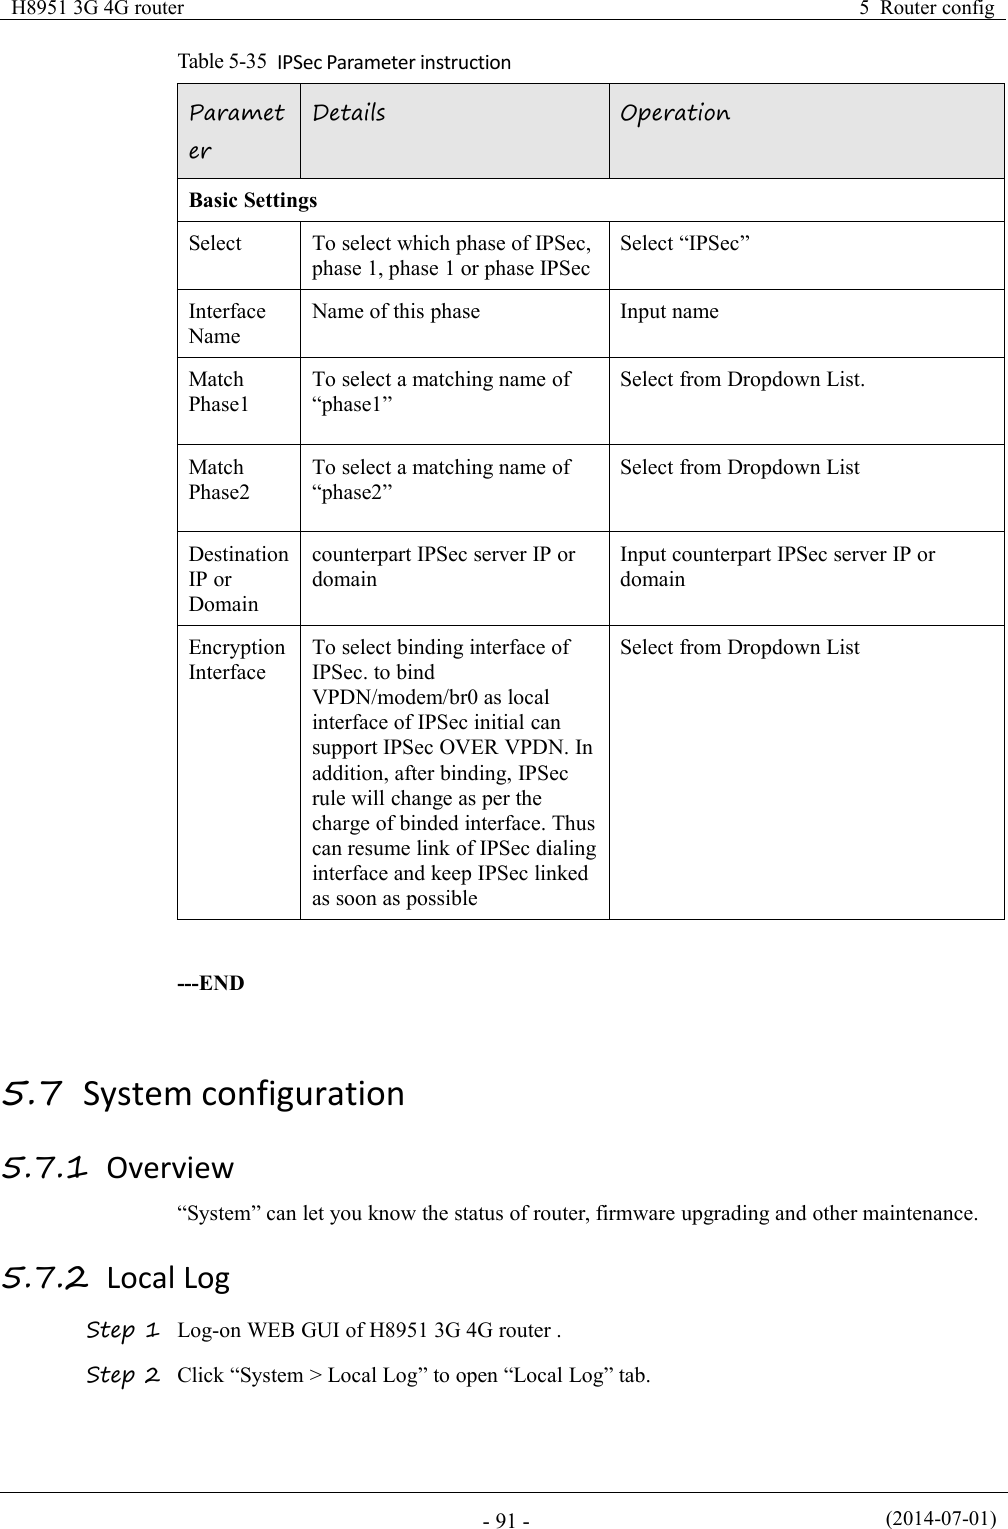 H8951 3G 4G router5 Router config(2014-07-01)- 91 -Table 5-35 IPSec Parameter instructionParameterDetailsOperationBasic SettingsSelectTo select which phase of IPSec,phase 1, phase 1 or phase IPSecSelect “IPSec”InterfaceNameName of this phaseInput nameMatchPhase1To select a matching name of“phase1”Select from Dropdown List.MatchPhase2To select a matching name of“phase2”Select from Dropdown ListDestinationIP orDomaincounterpart IPSec server IP ordomainInput counterpart IPSec server IP ordomainEncryptionInterfaceTo select binding interface ofIPSec. to bindVPDN/modem/br0 as localinterface of IPSec initial cansupport IPSec OVER VPDN. Inaddition, after binding, IPSecrule will change as per thecharge of binded interface. Thuscan resume link of IPSec dialinginterface and keep IPSec linkedas soon as possibleSelect from Dropdown List---END5.7 System configuration5.7.1 Overview“System” can let you know the status of router, firmware upgrading and other maintenance.5.7.2 Local LogStep 1 Log-on WEB GUI of H8951 3G 4G router .Step 2 Click “System &gt; Local Log” to open “Local Log” tab.